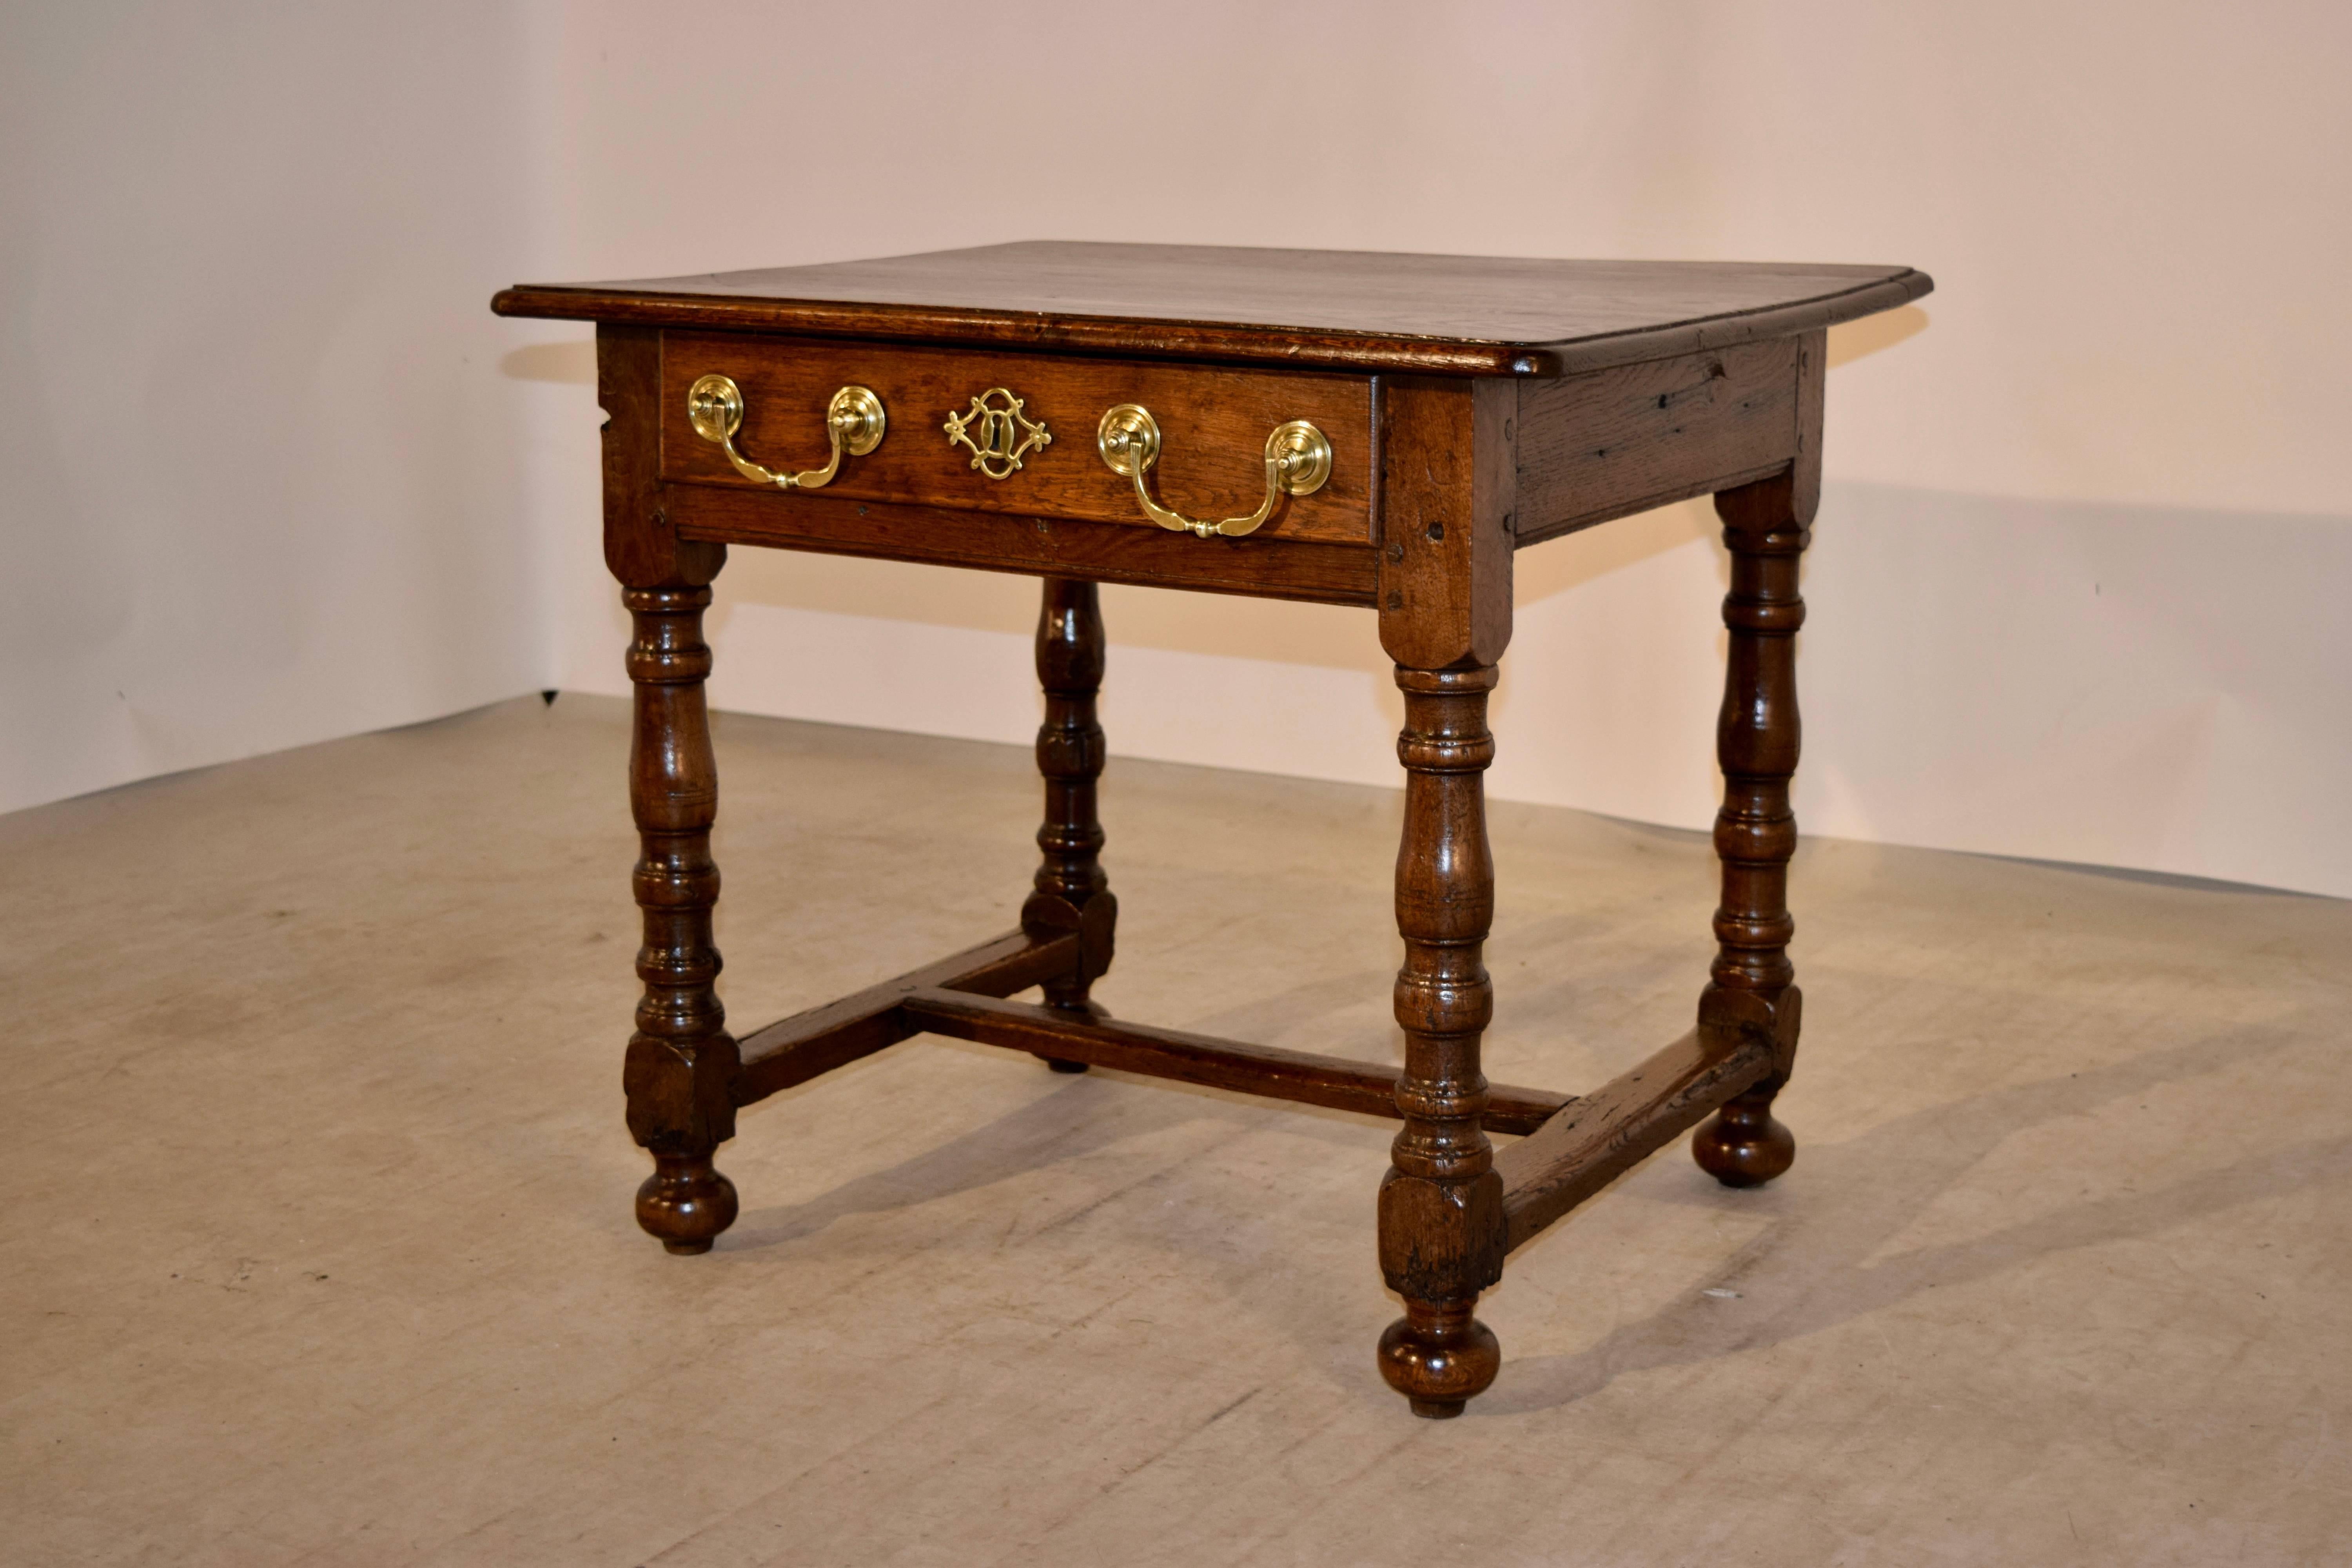 18th Century English side table made from oak with a beveled edge around the top, following down to a simple apron with a single drawer in the front.  The legs are hand turned and have signs of wear and age and the feet have been added later. 